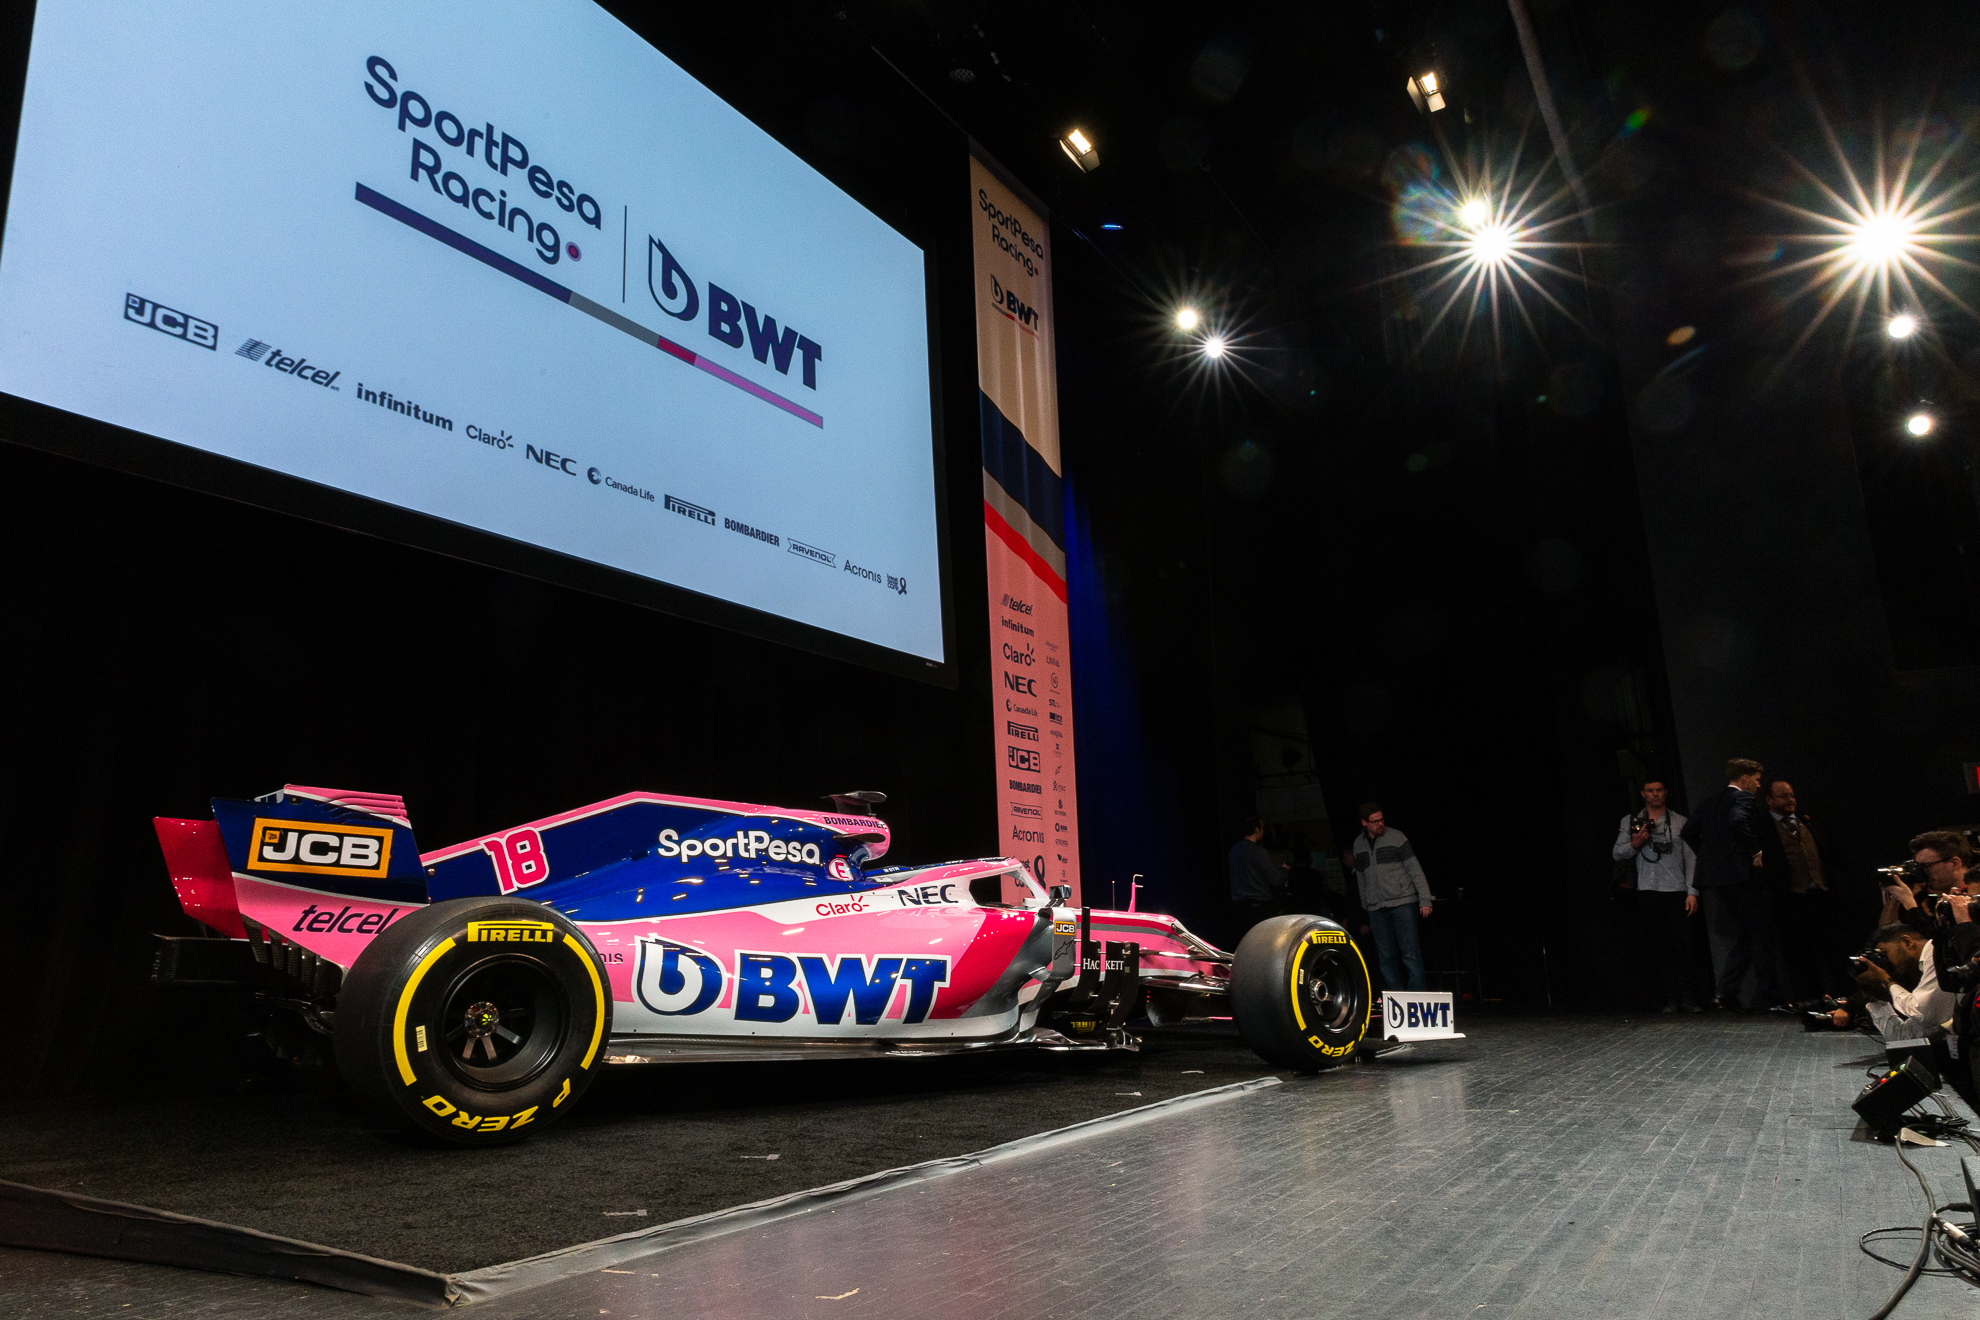  Toronto, Canada 13 Feb, 2019. SportPesa Racing Point F1 Team launch their 2019 car and livery at the John Bassett Theatre in Toronto, Canada. Credit: Gary Hebding Jr/Alamy Live News 